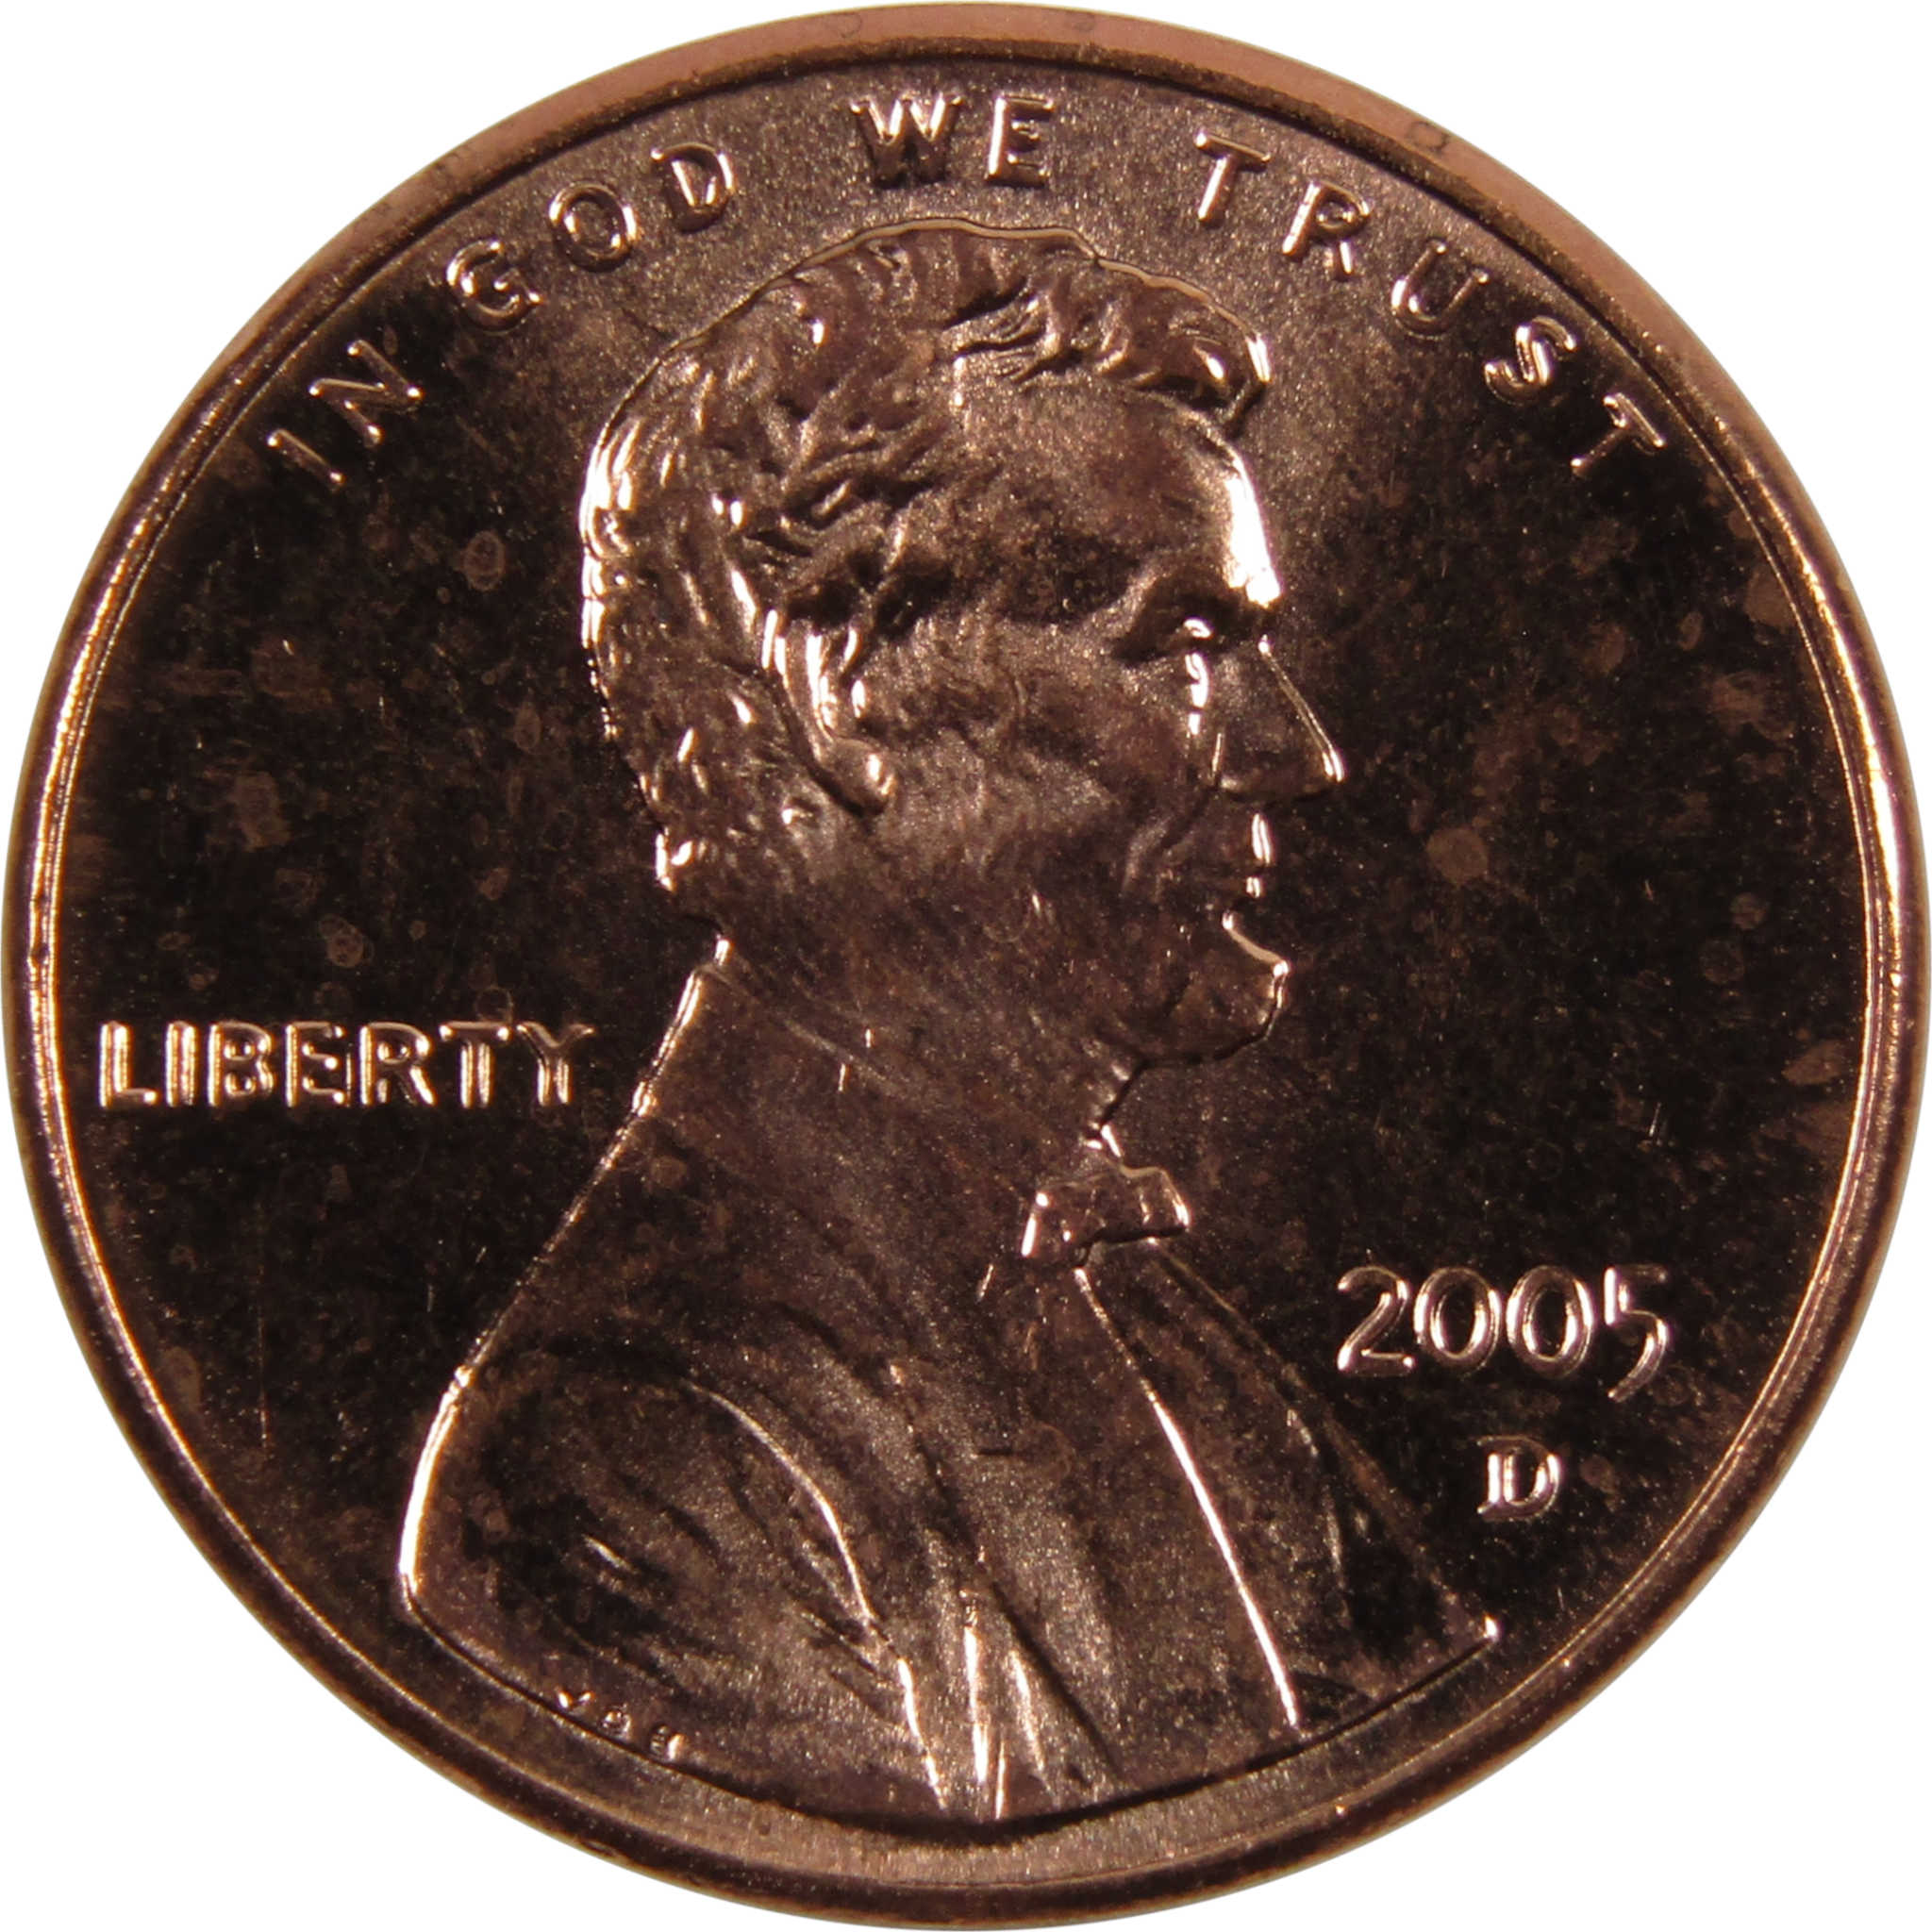 2005 D Lincoln Memorial Cent BU Uncirculated Penny 1c Coin